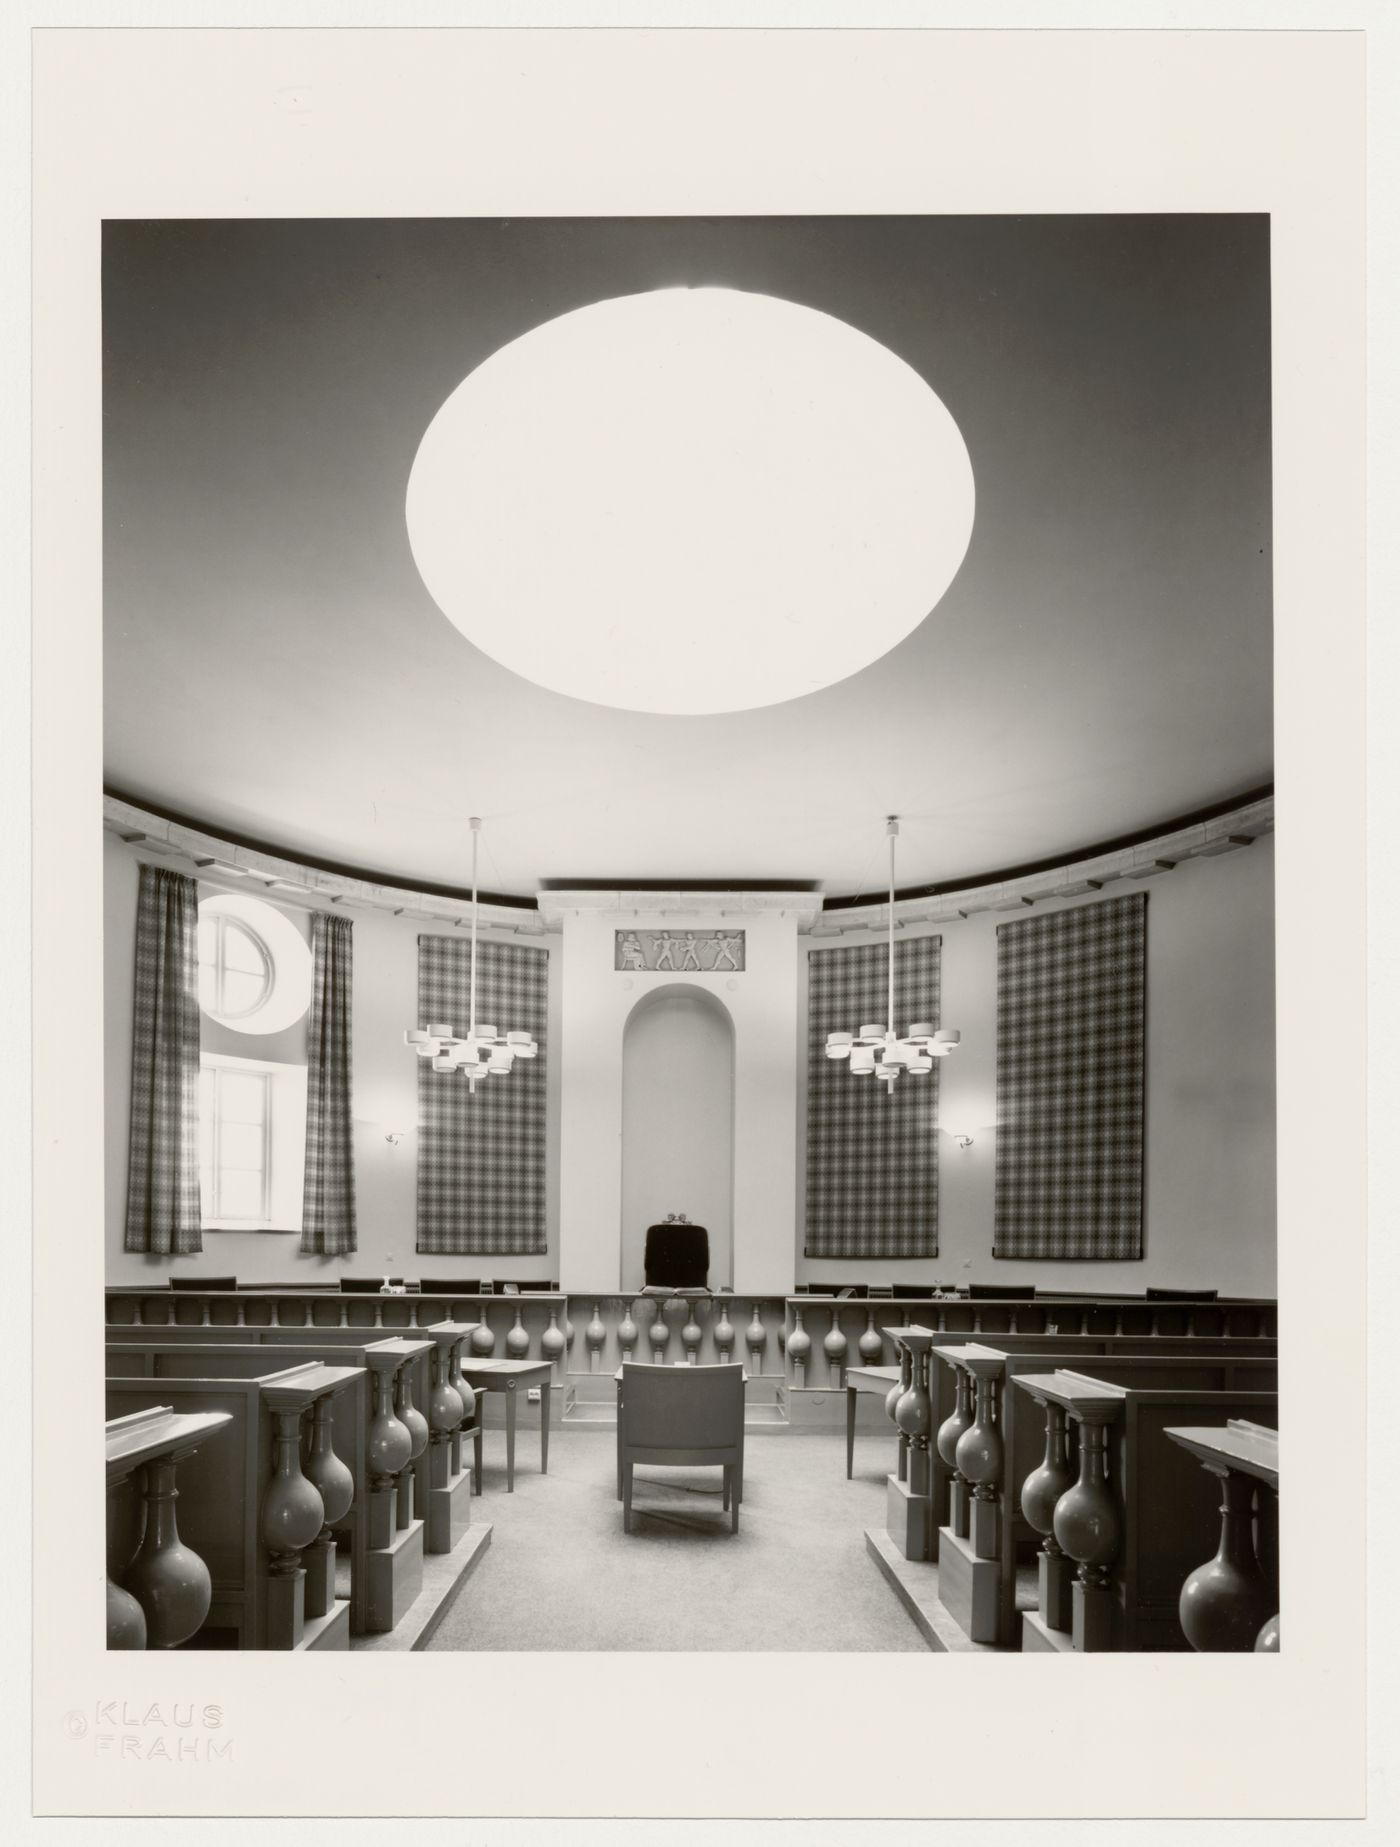 Interior view of the circular courtroom of Lister County Courthouse, Sölvesborg, Sweden